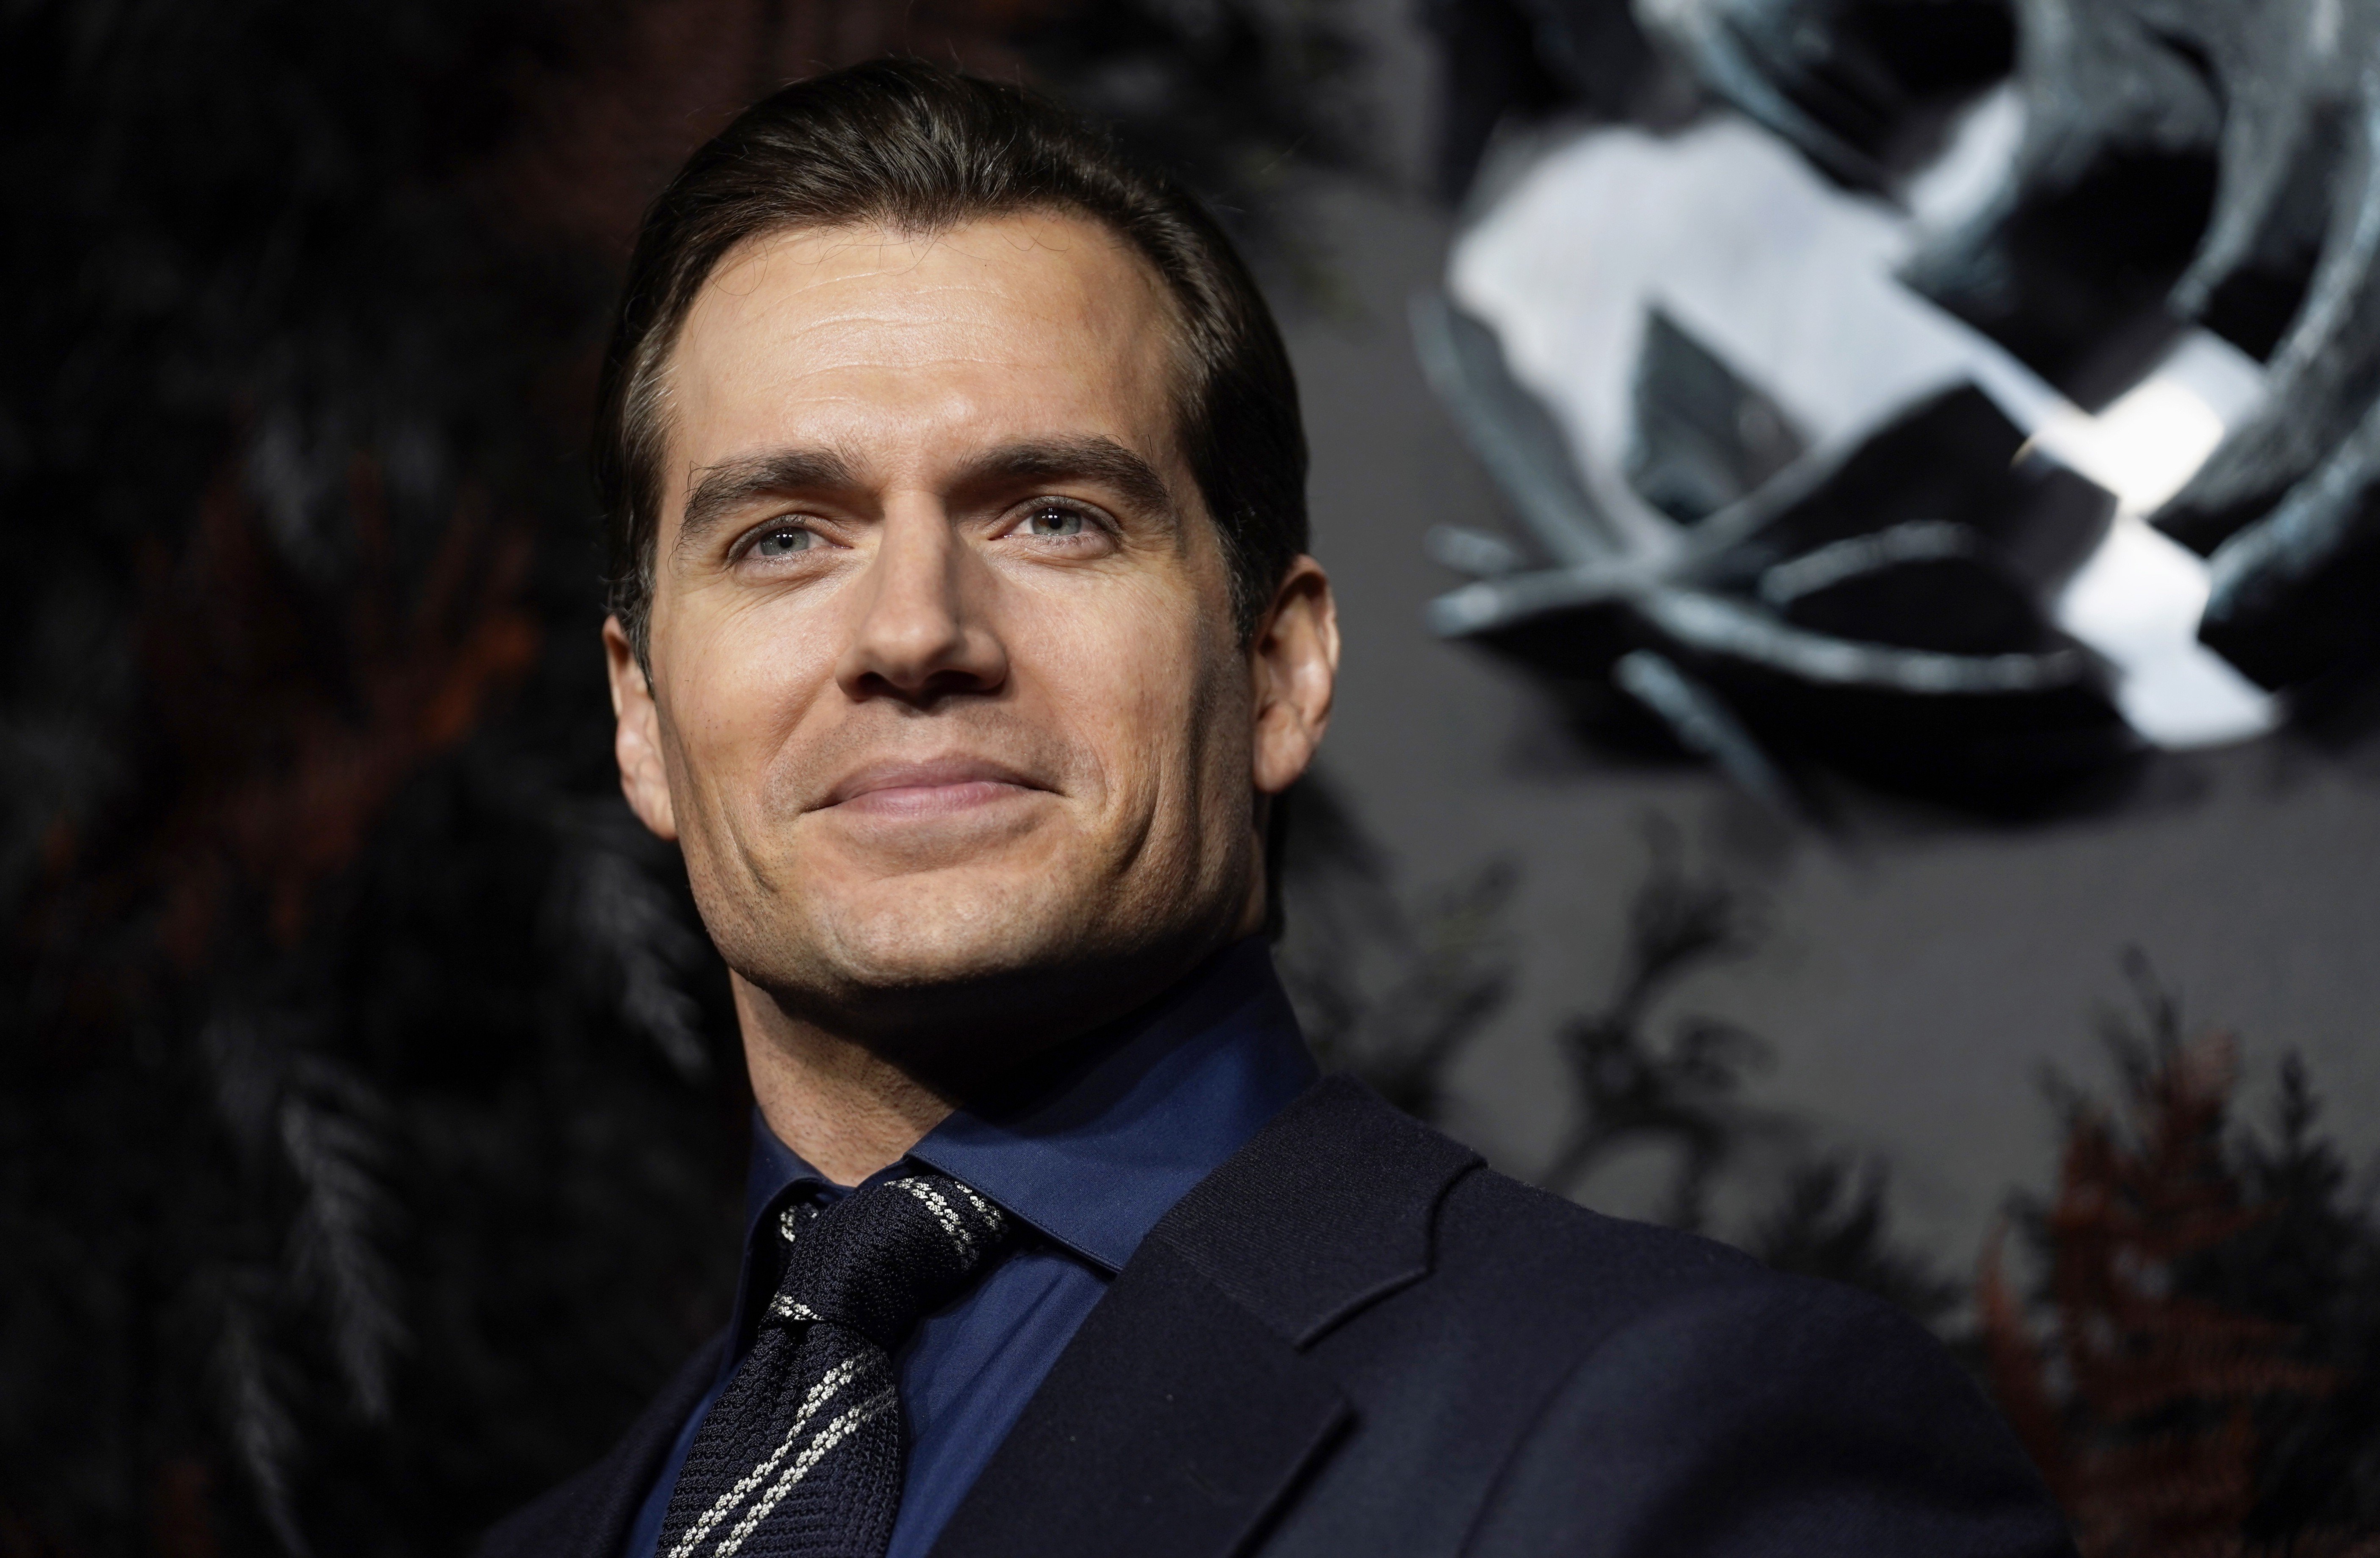 Henry Cavill at the world premiere of The Witcher in London on December 16. From the moment he opens his mouth and speaks in the first episode, we know the right Geralt has been found. Photo: EPA-EFE